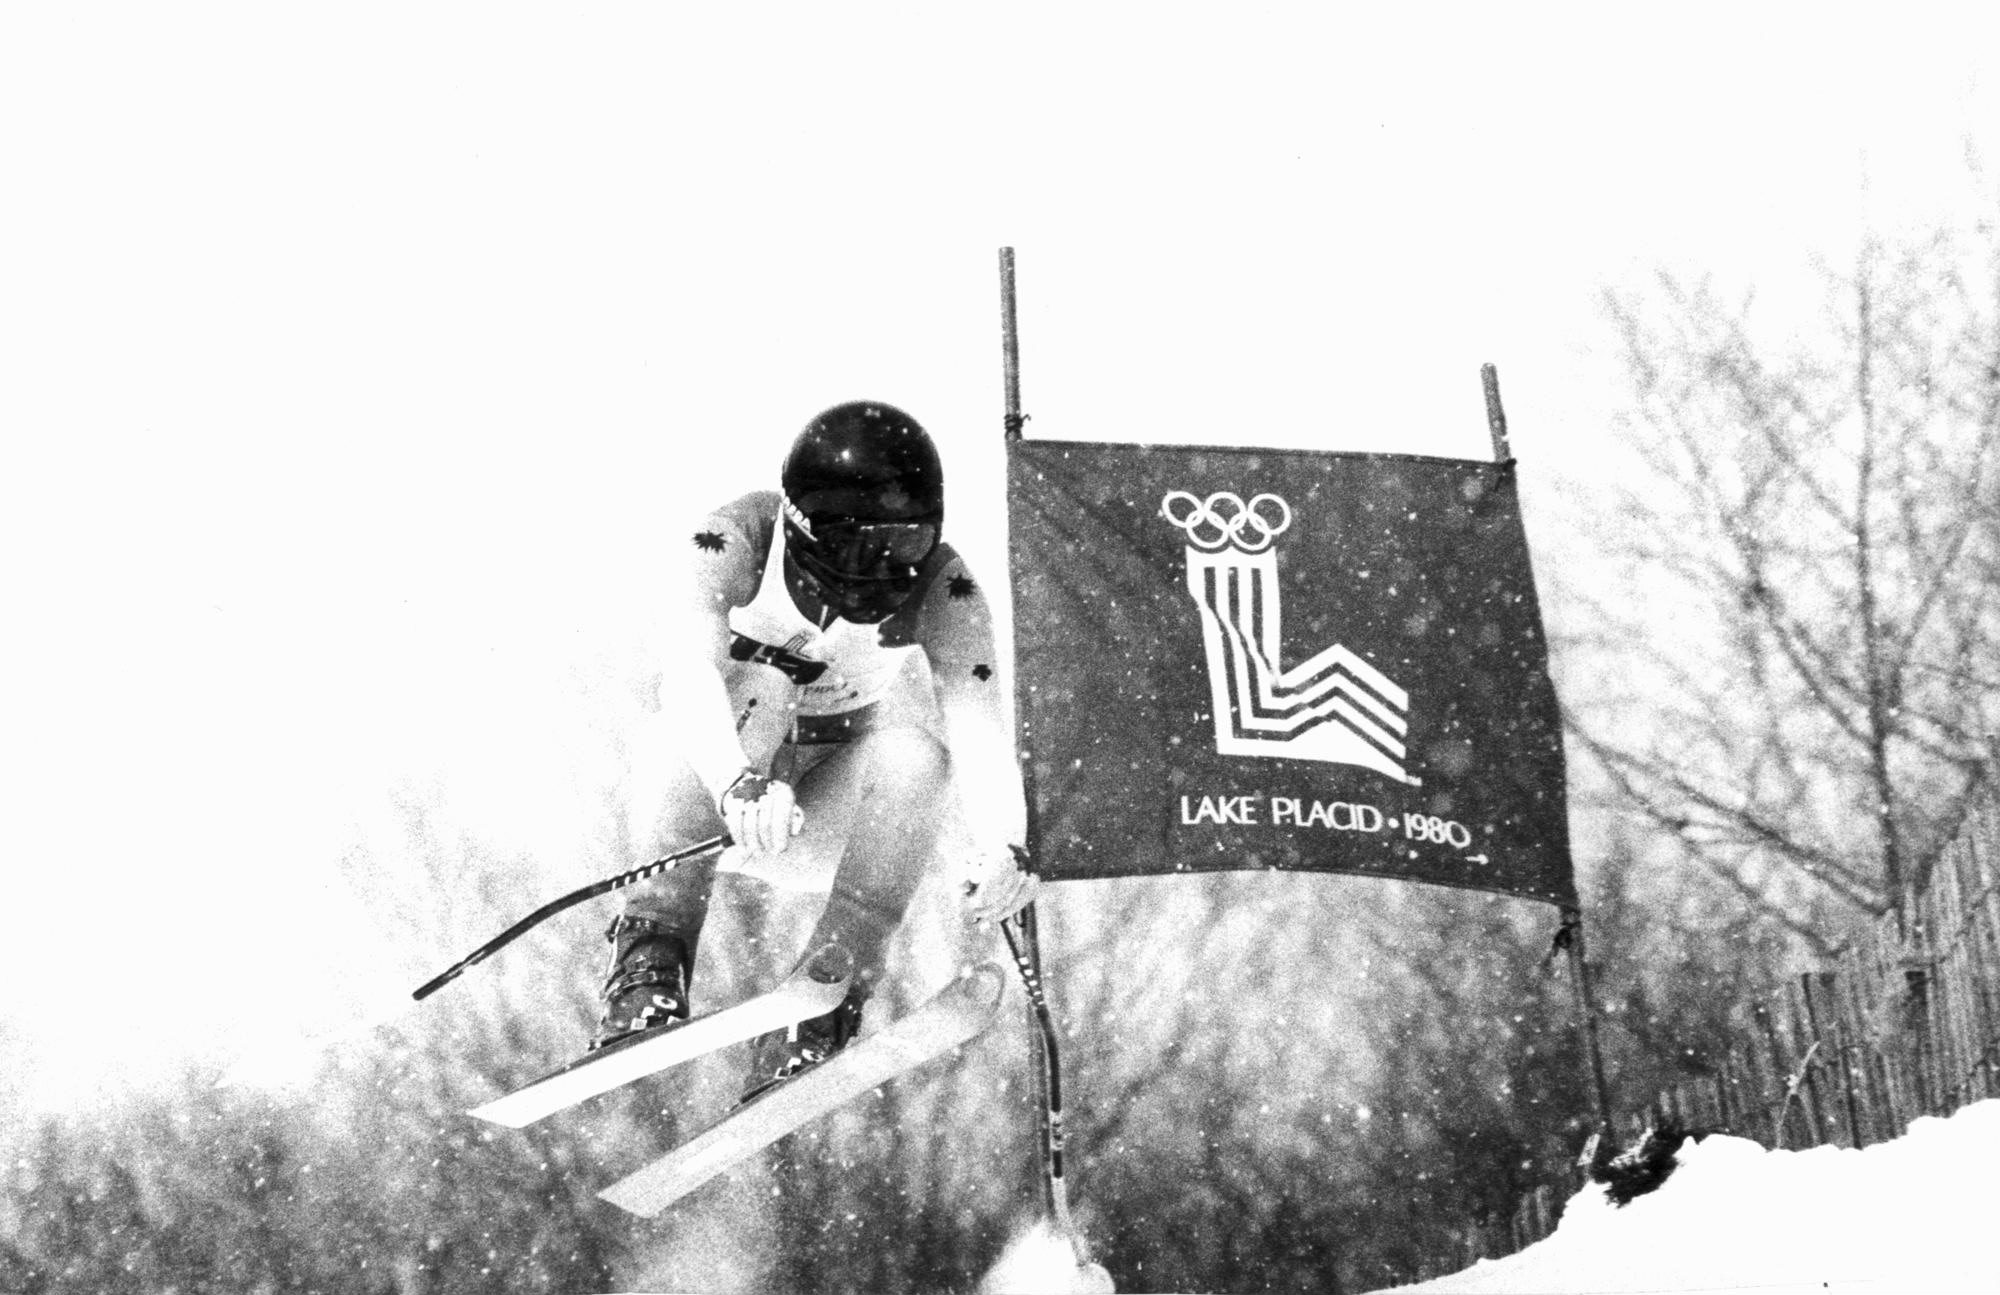 Canadian skier Steve Podborski is in the air while he speeds down the Whiteface Mountain race course on his way to win an Olympic bronze medal, clocking time 1.46.62, Feb. 14, 1980 (CP PHOTO/ AP)